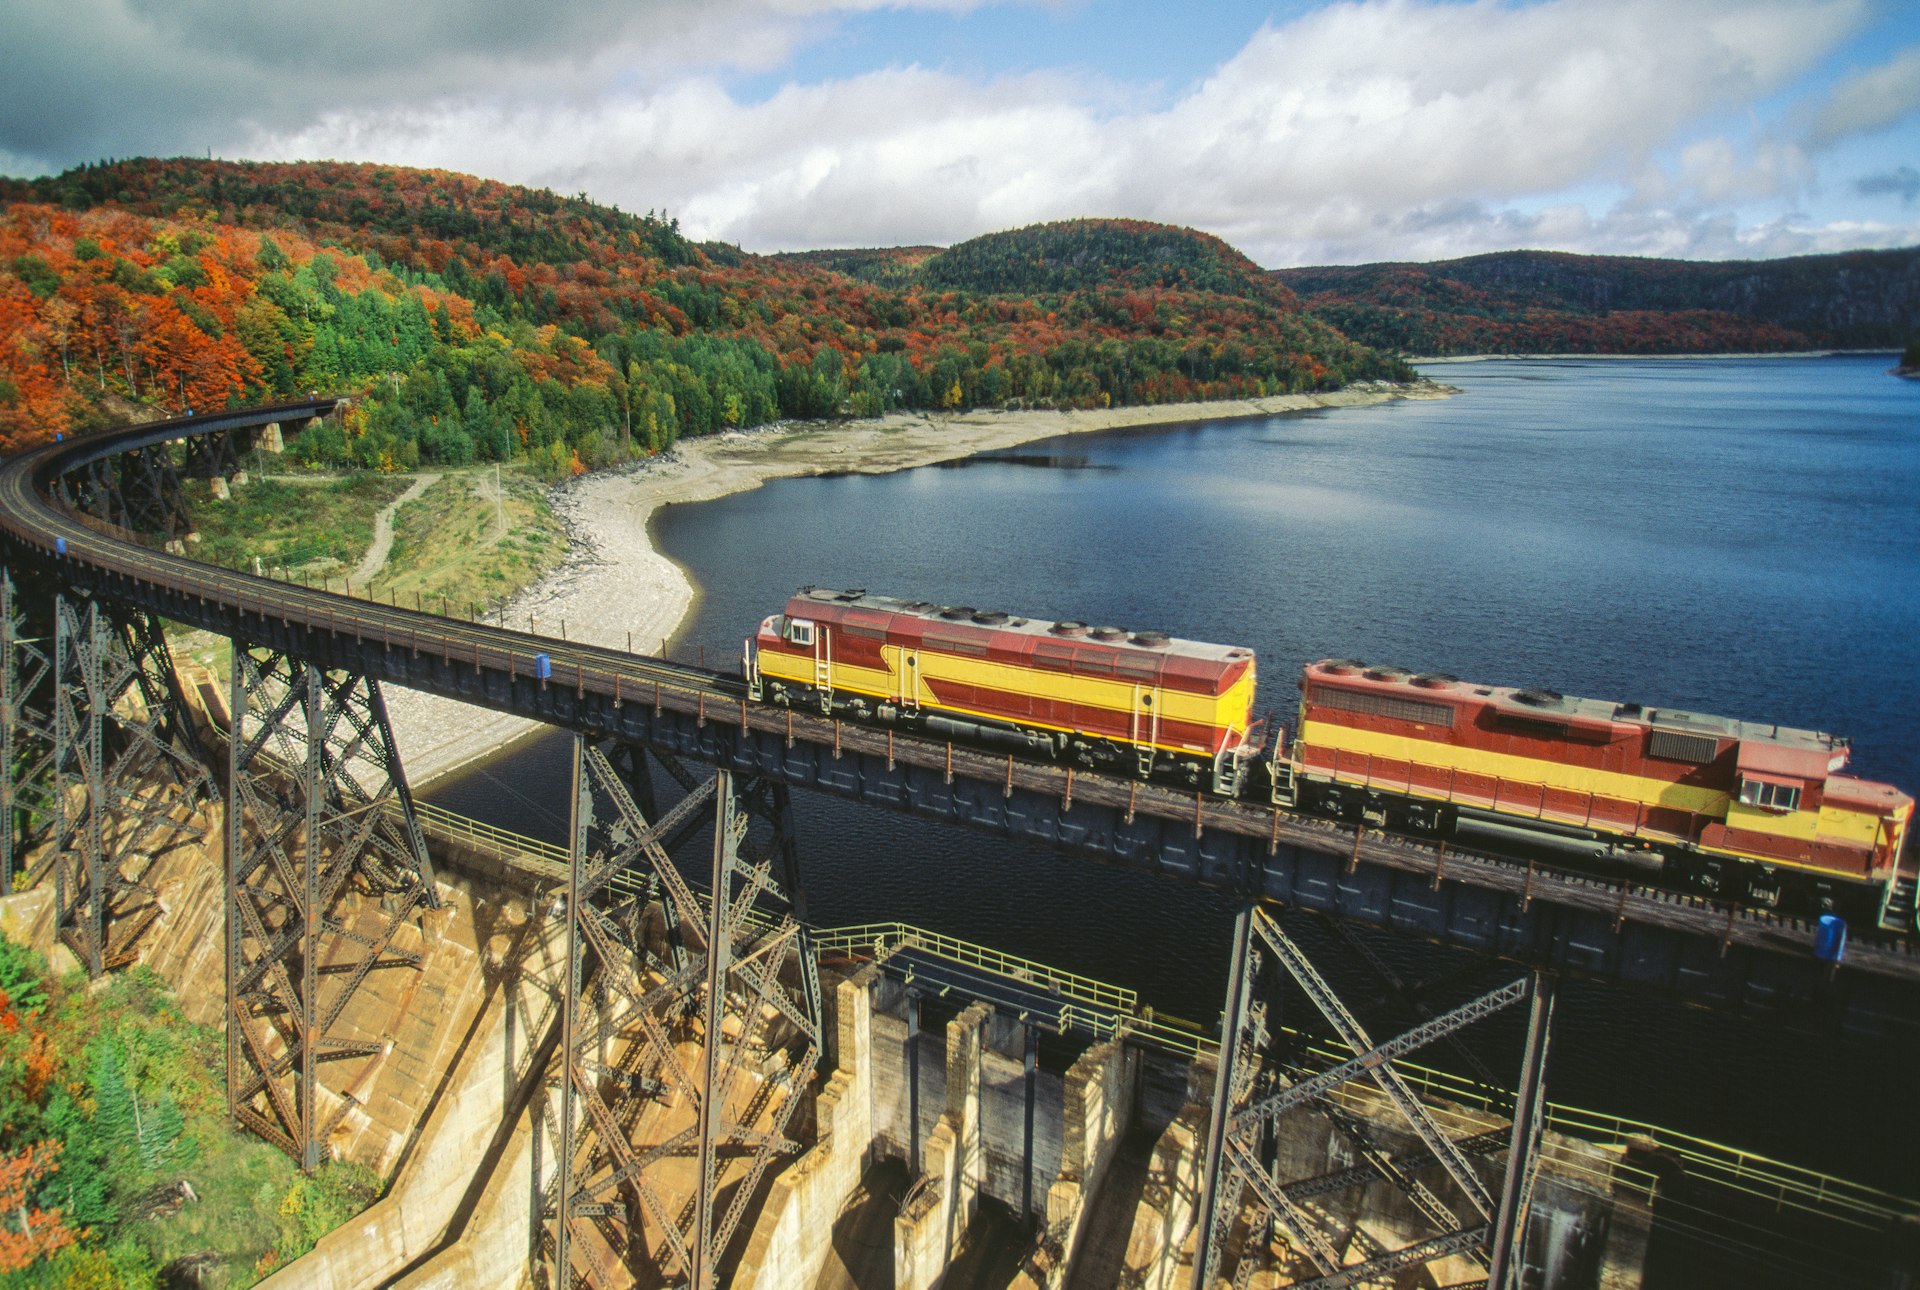 Agawa Canyon Train passing over a bridge surrounded by colorful fall foliage, Canada